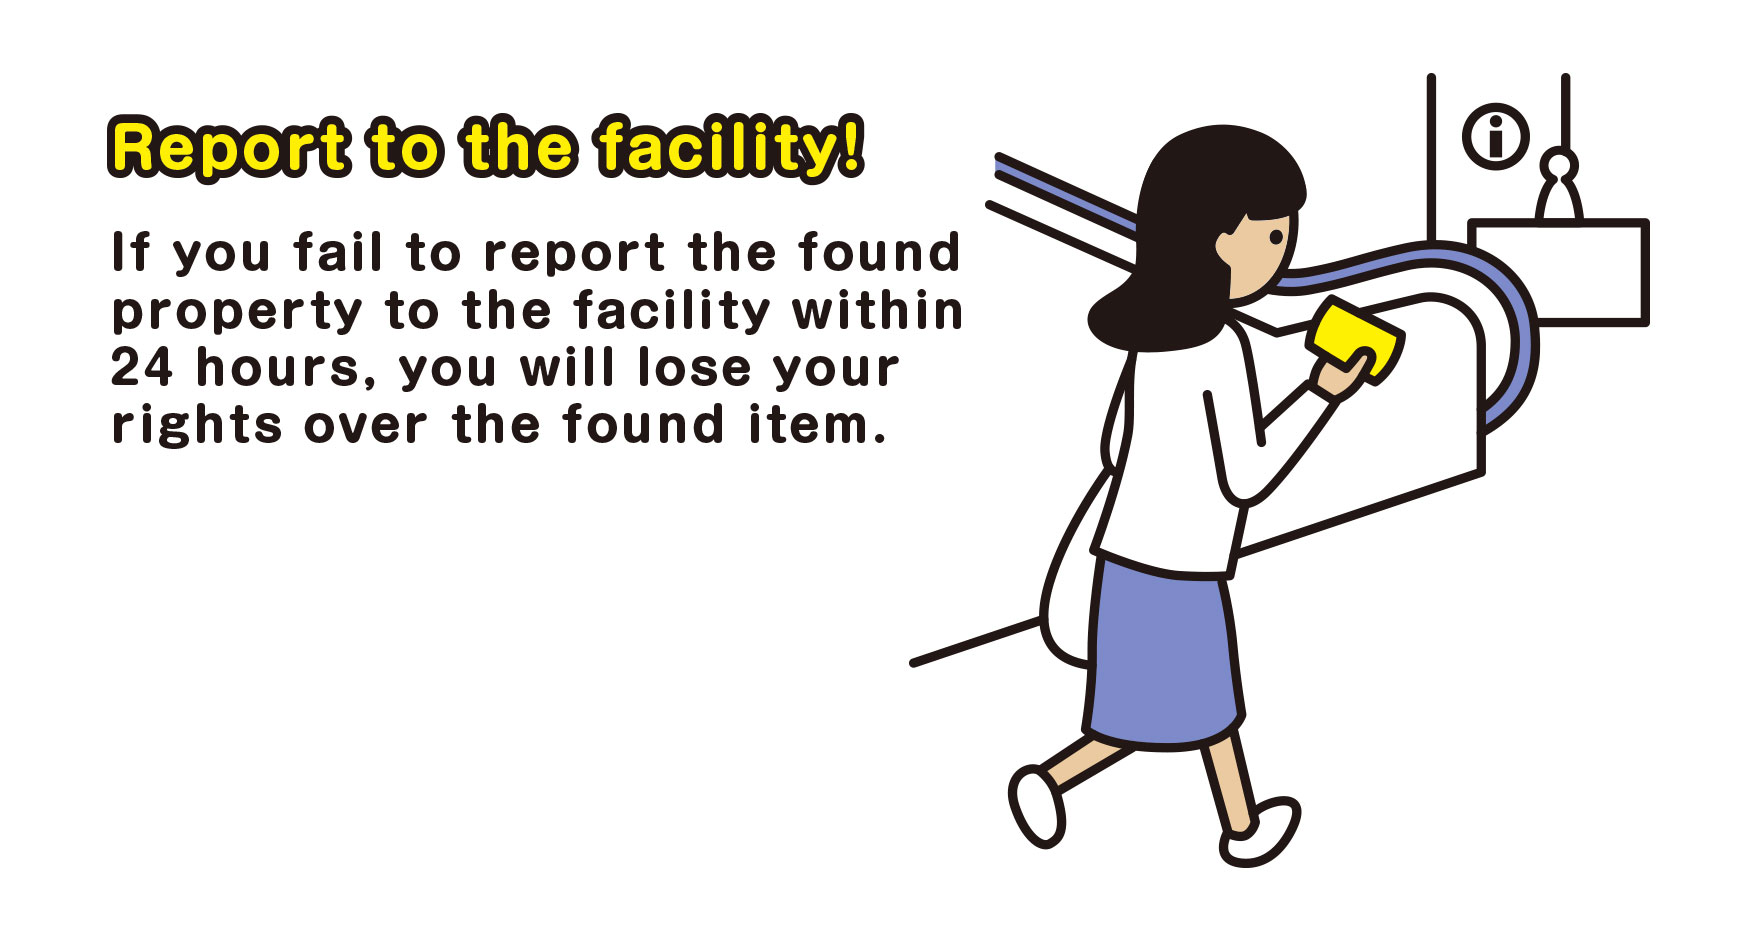 Report the to the facility!　If you fail to report the found property to the facility within 24 hours, you will lose your rights over the found item.